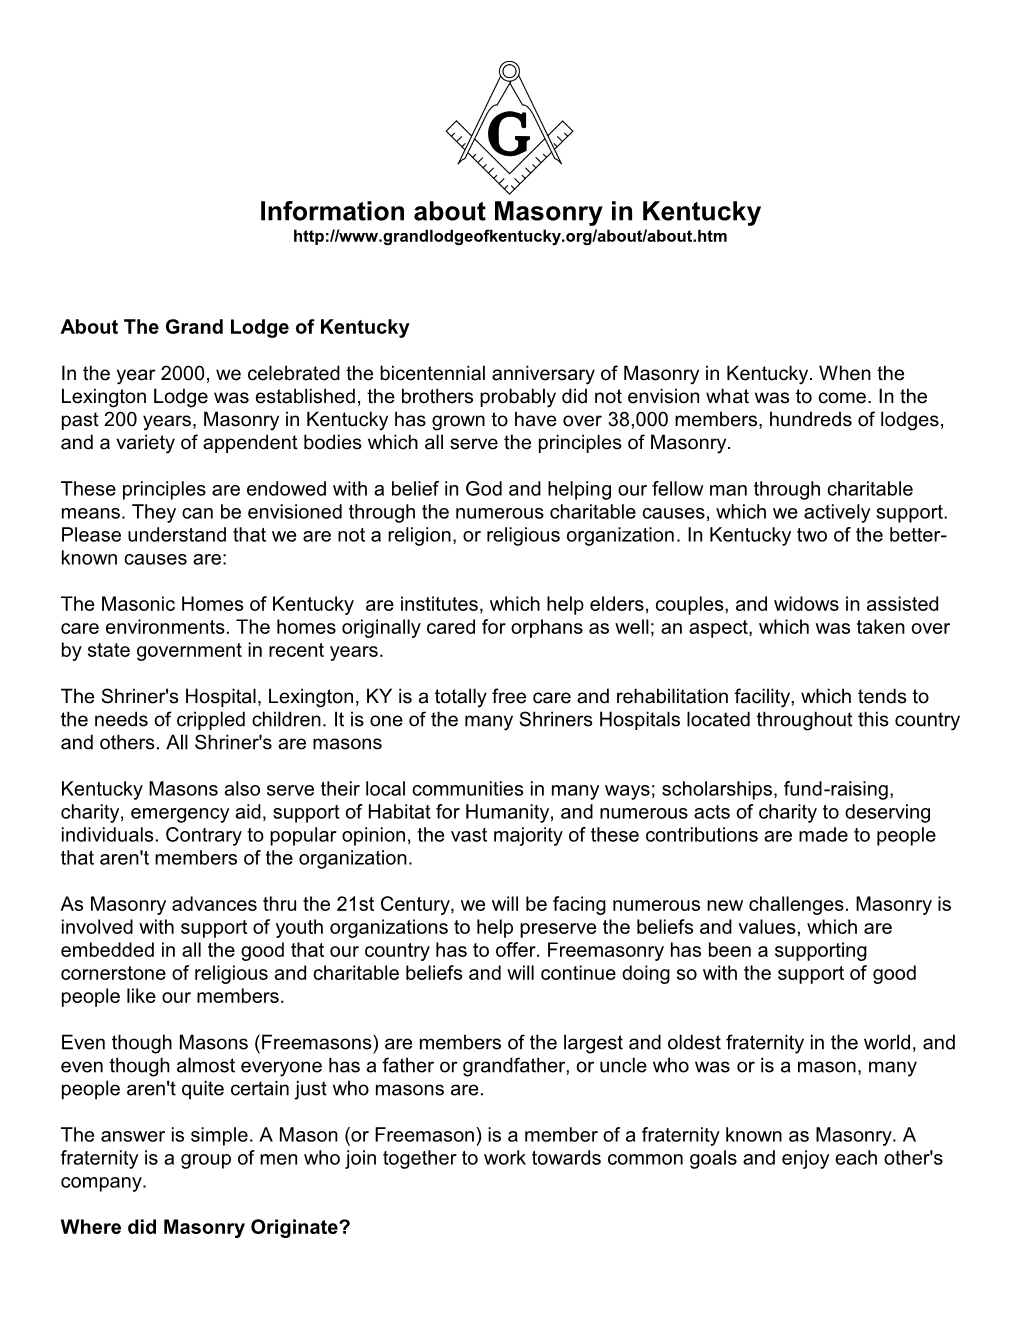 Information About Masonry in Kentucky